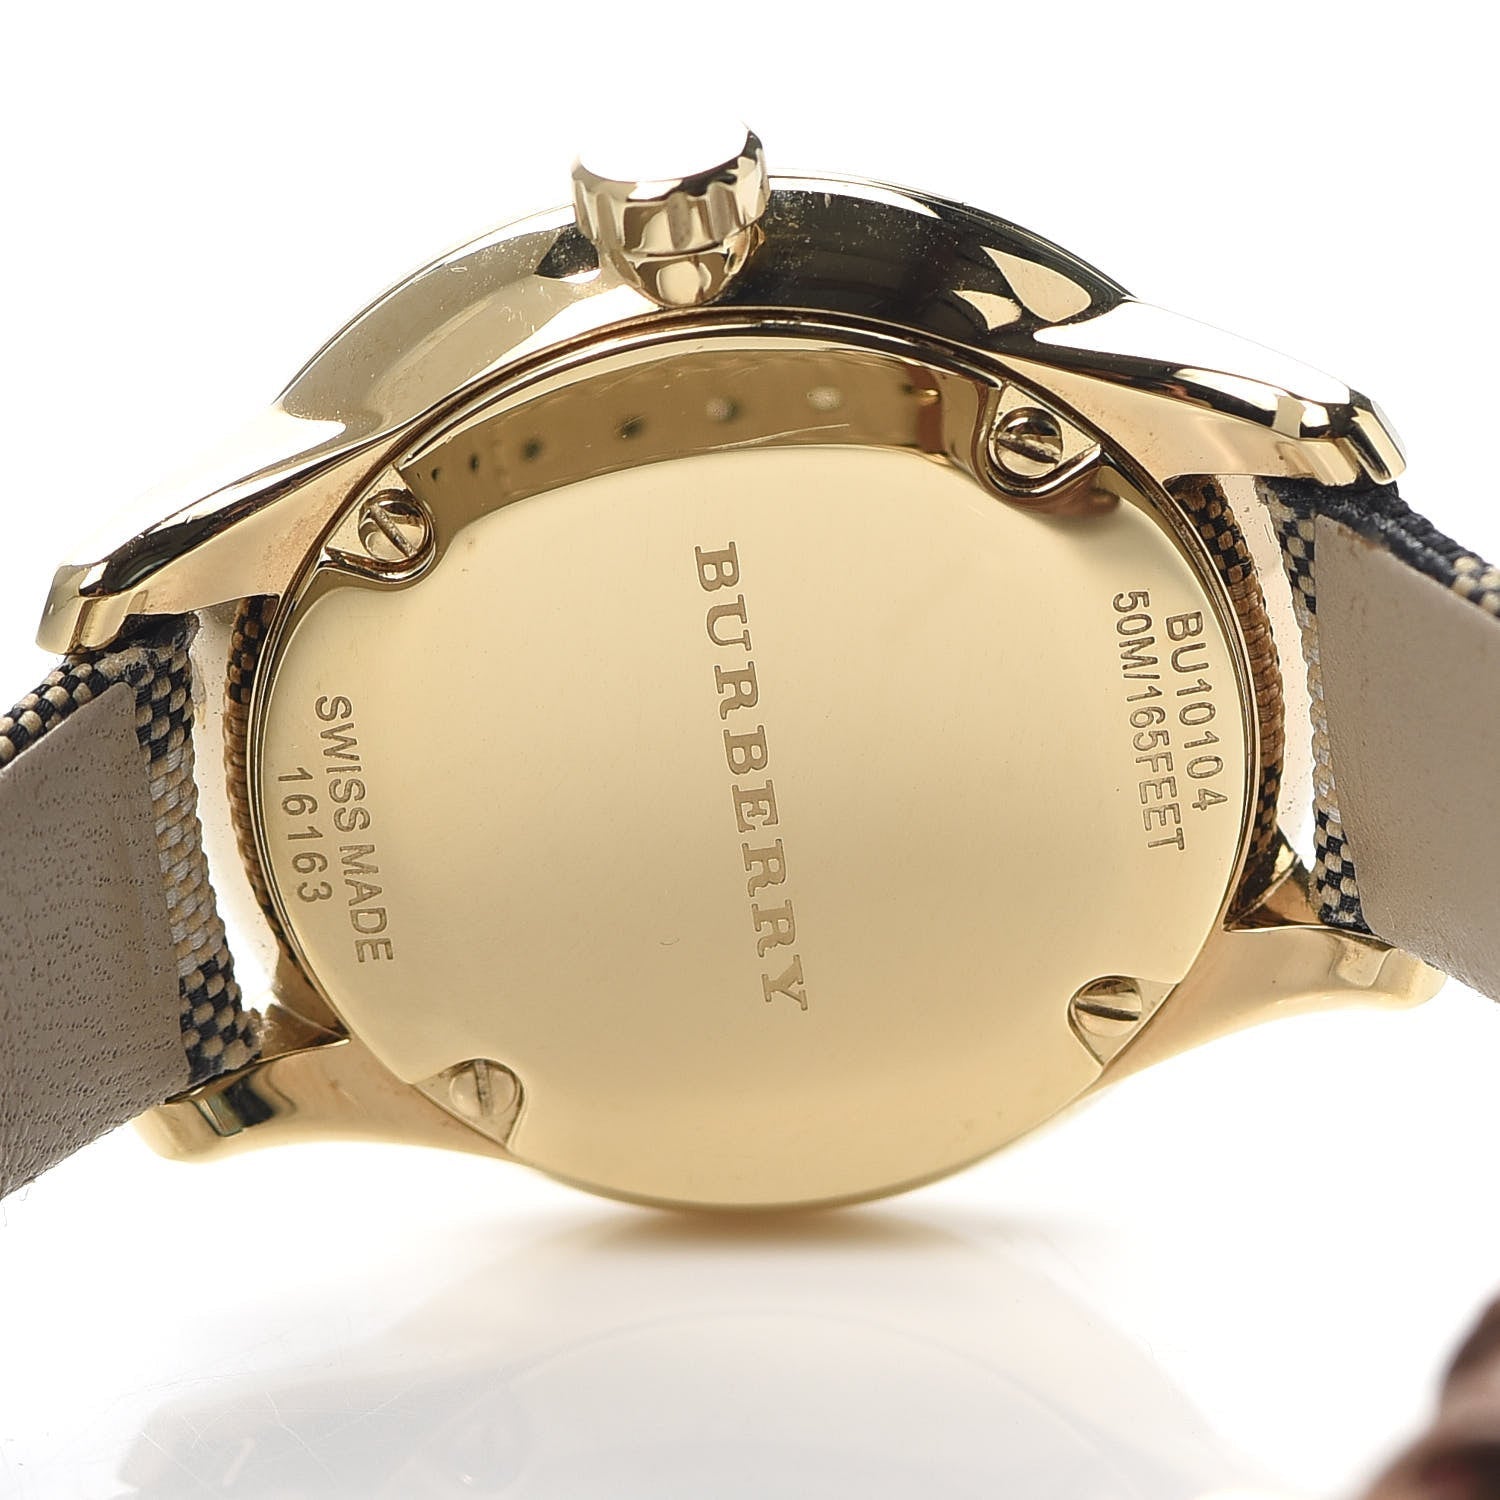 Burberry Classic Gold Dial Leather Strap Watch for Women - BU10104